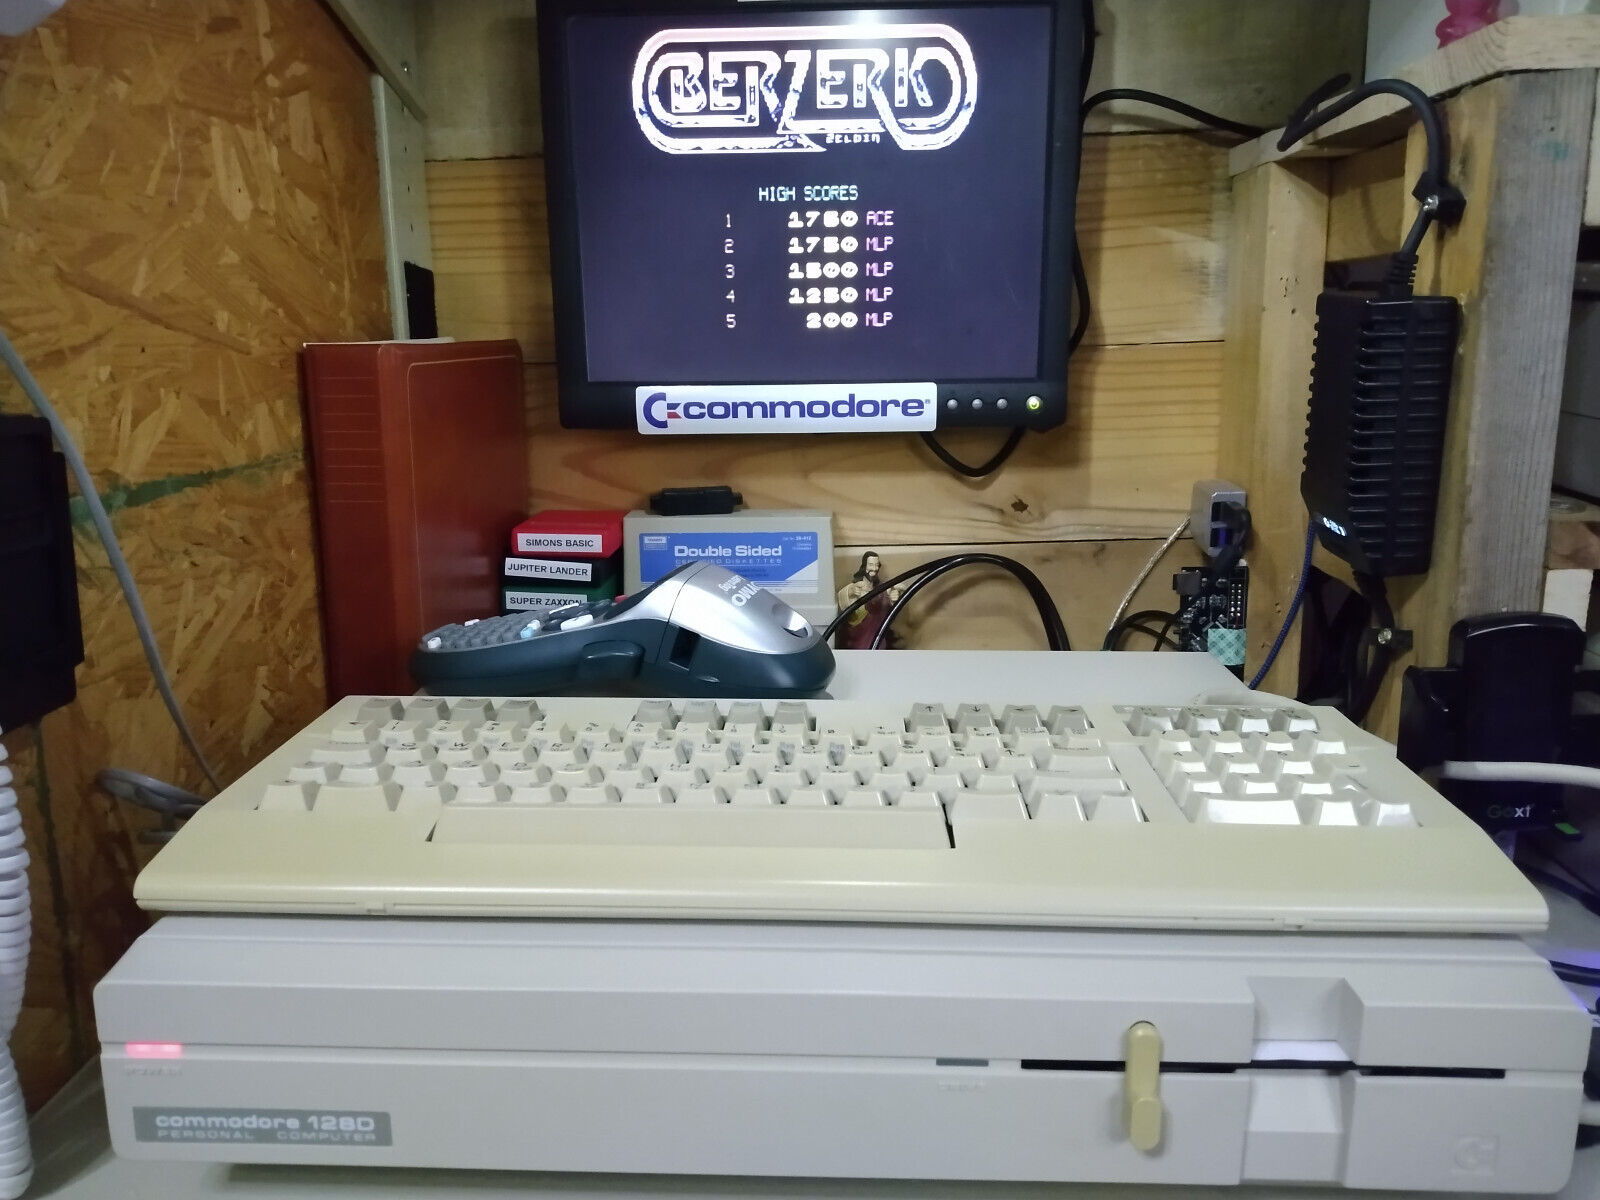 Commodore 128DCR with Original manuals, Software and 1541 Disk Drive +